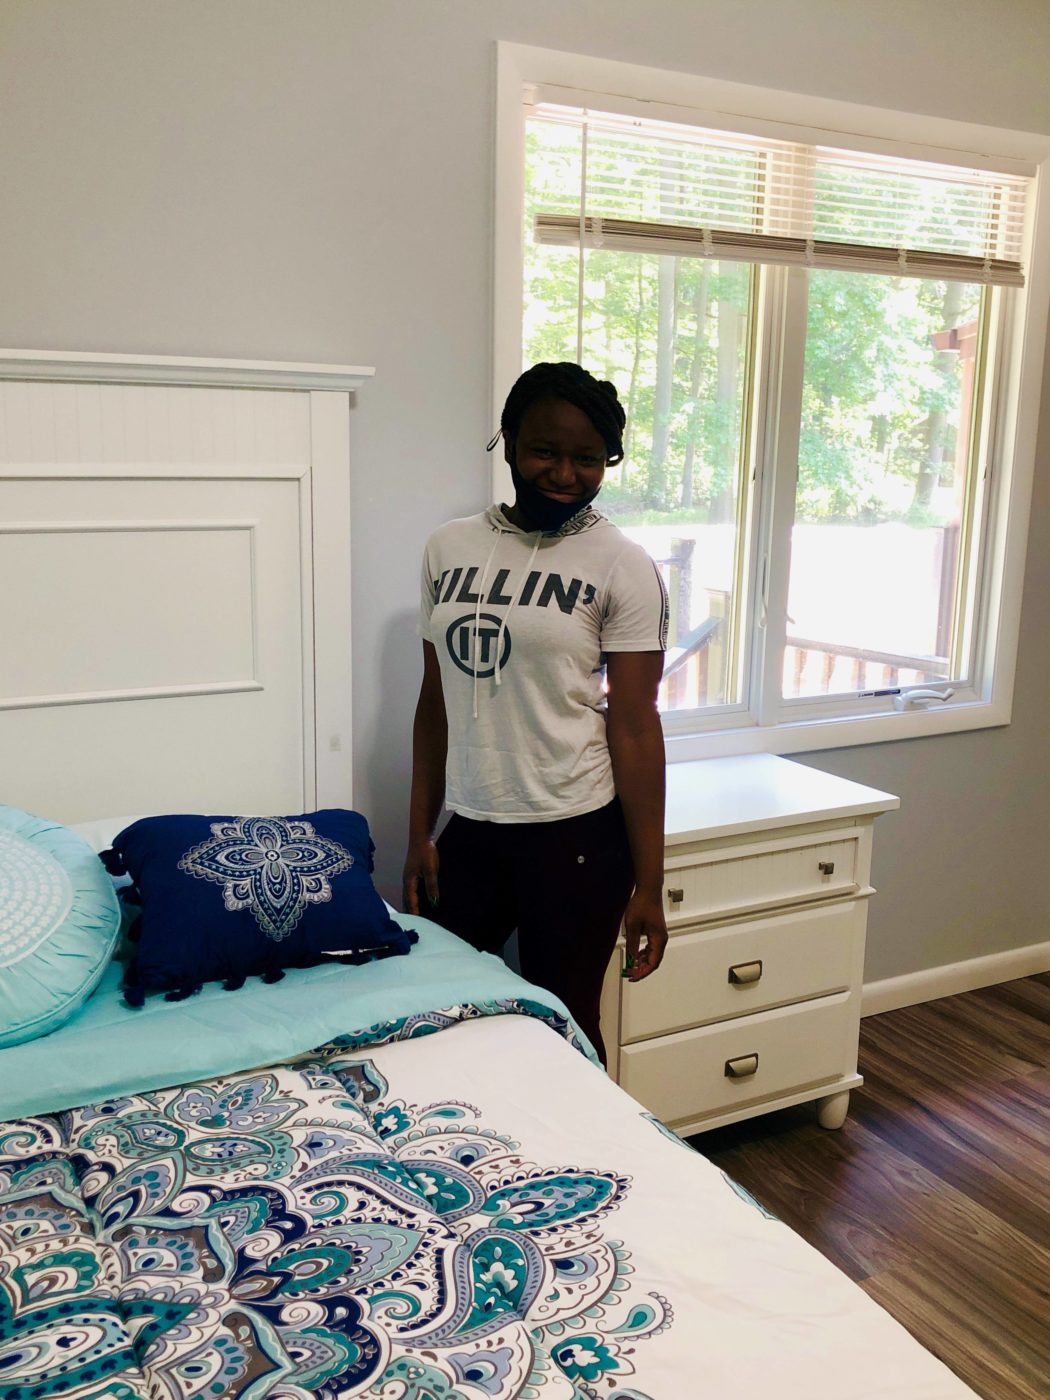 Veronica is proud to show off her new room.